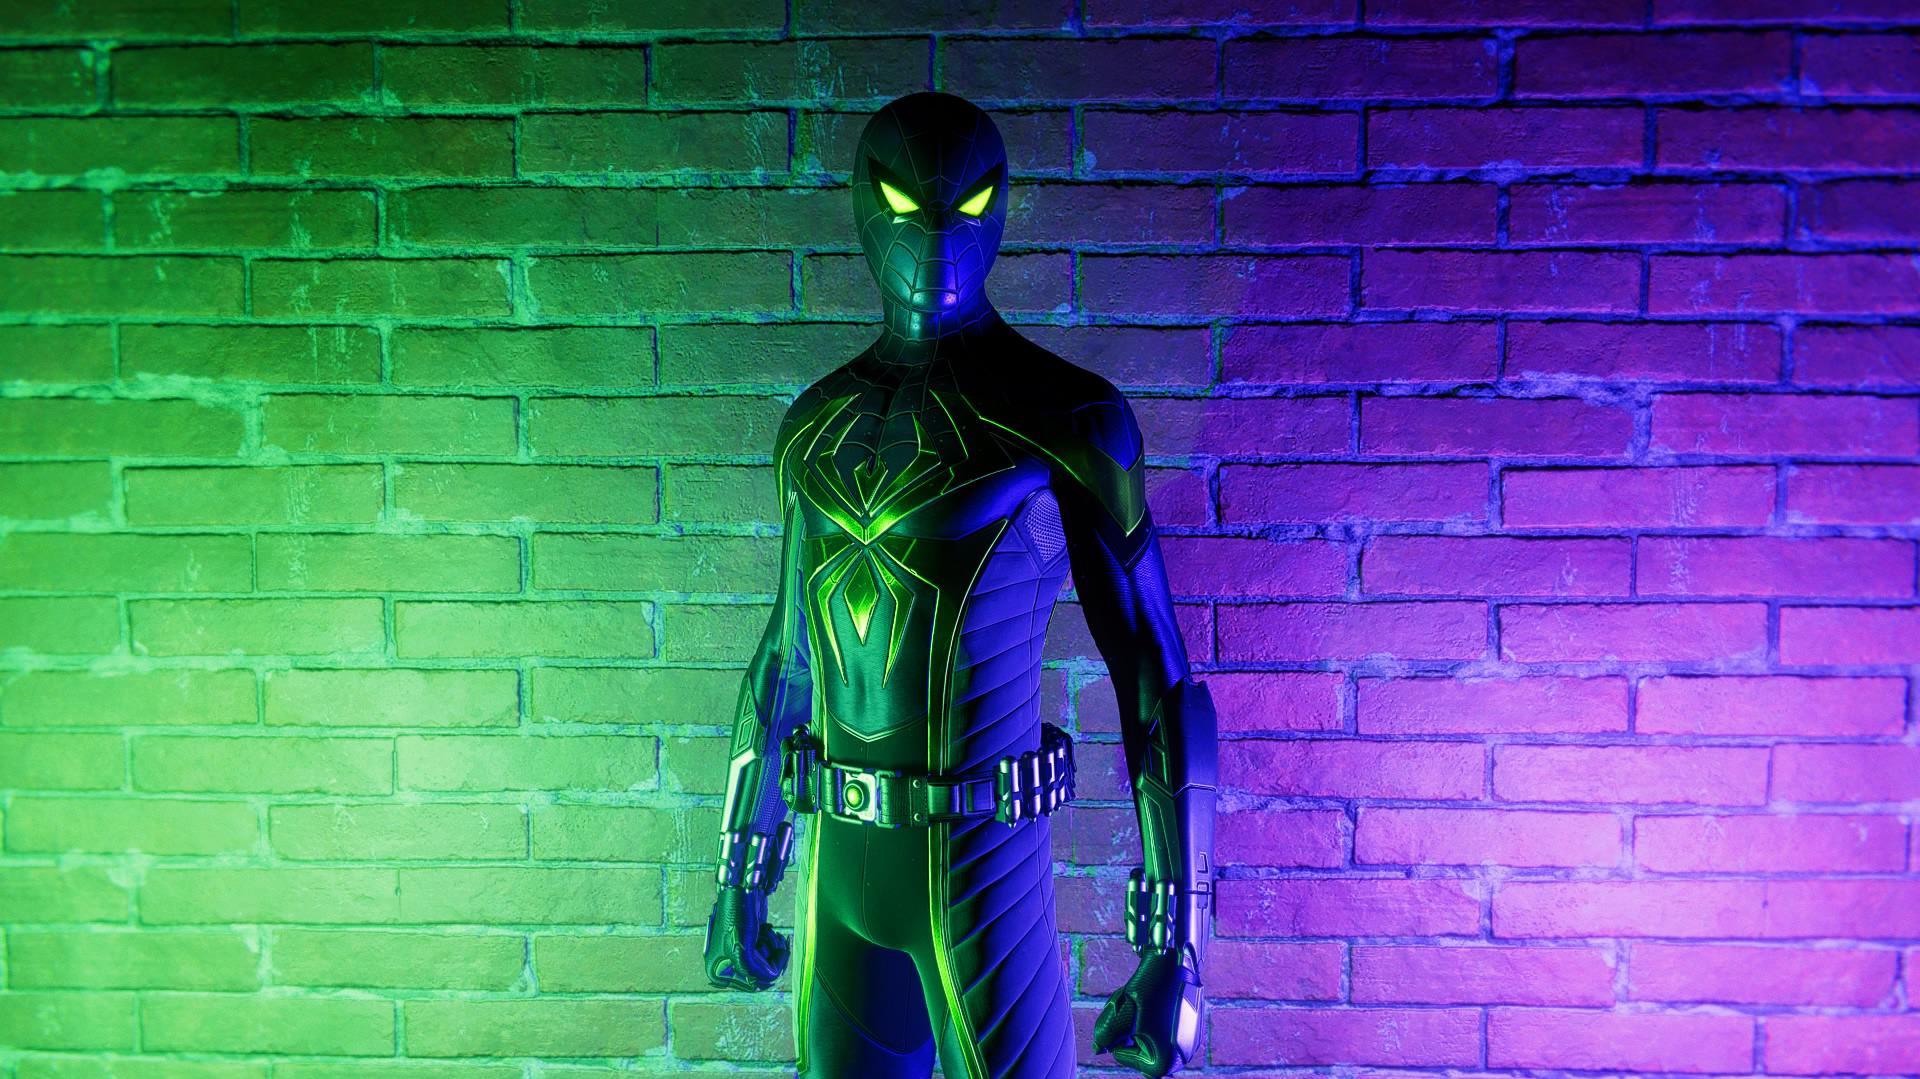 The Green And Purple Look Great For Spider Man Suits In My Opinion